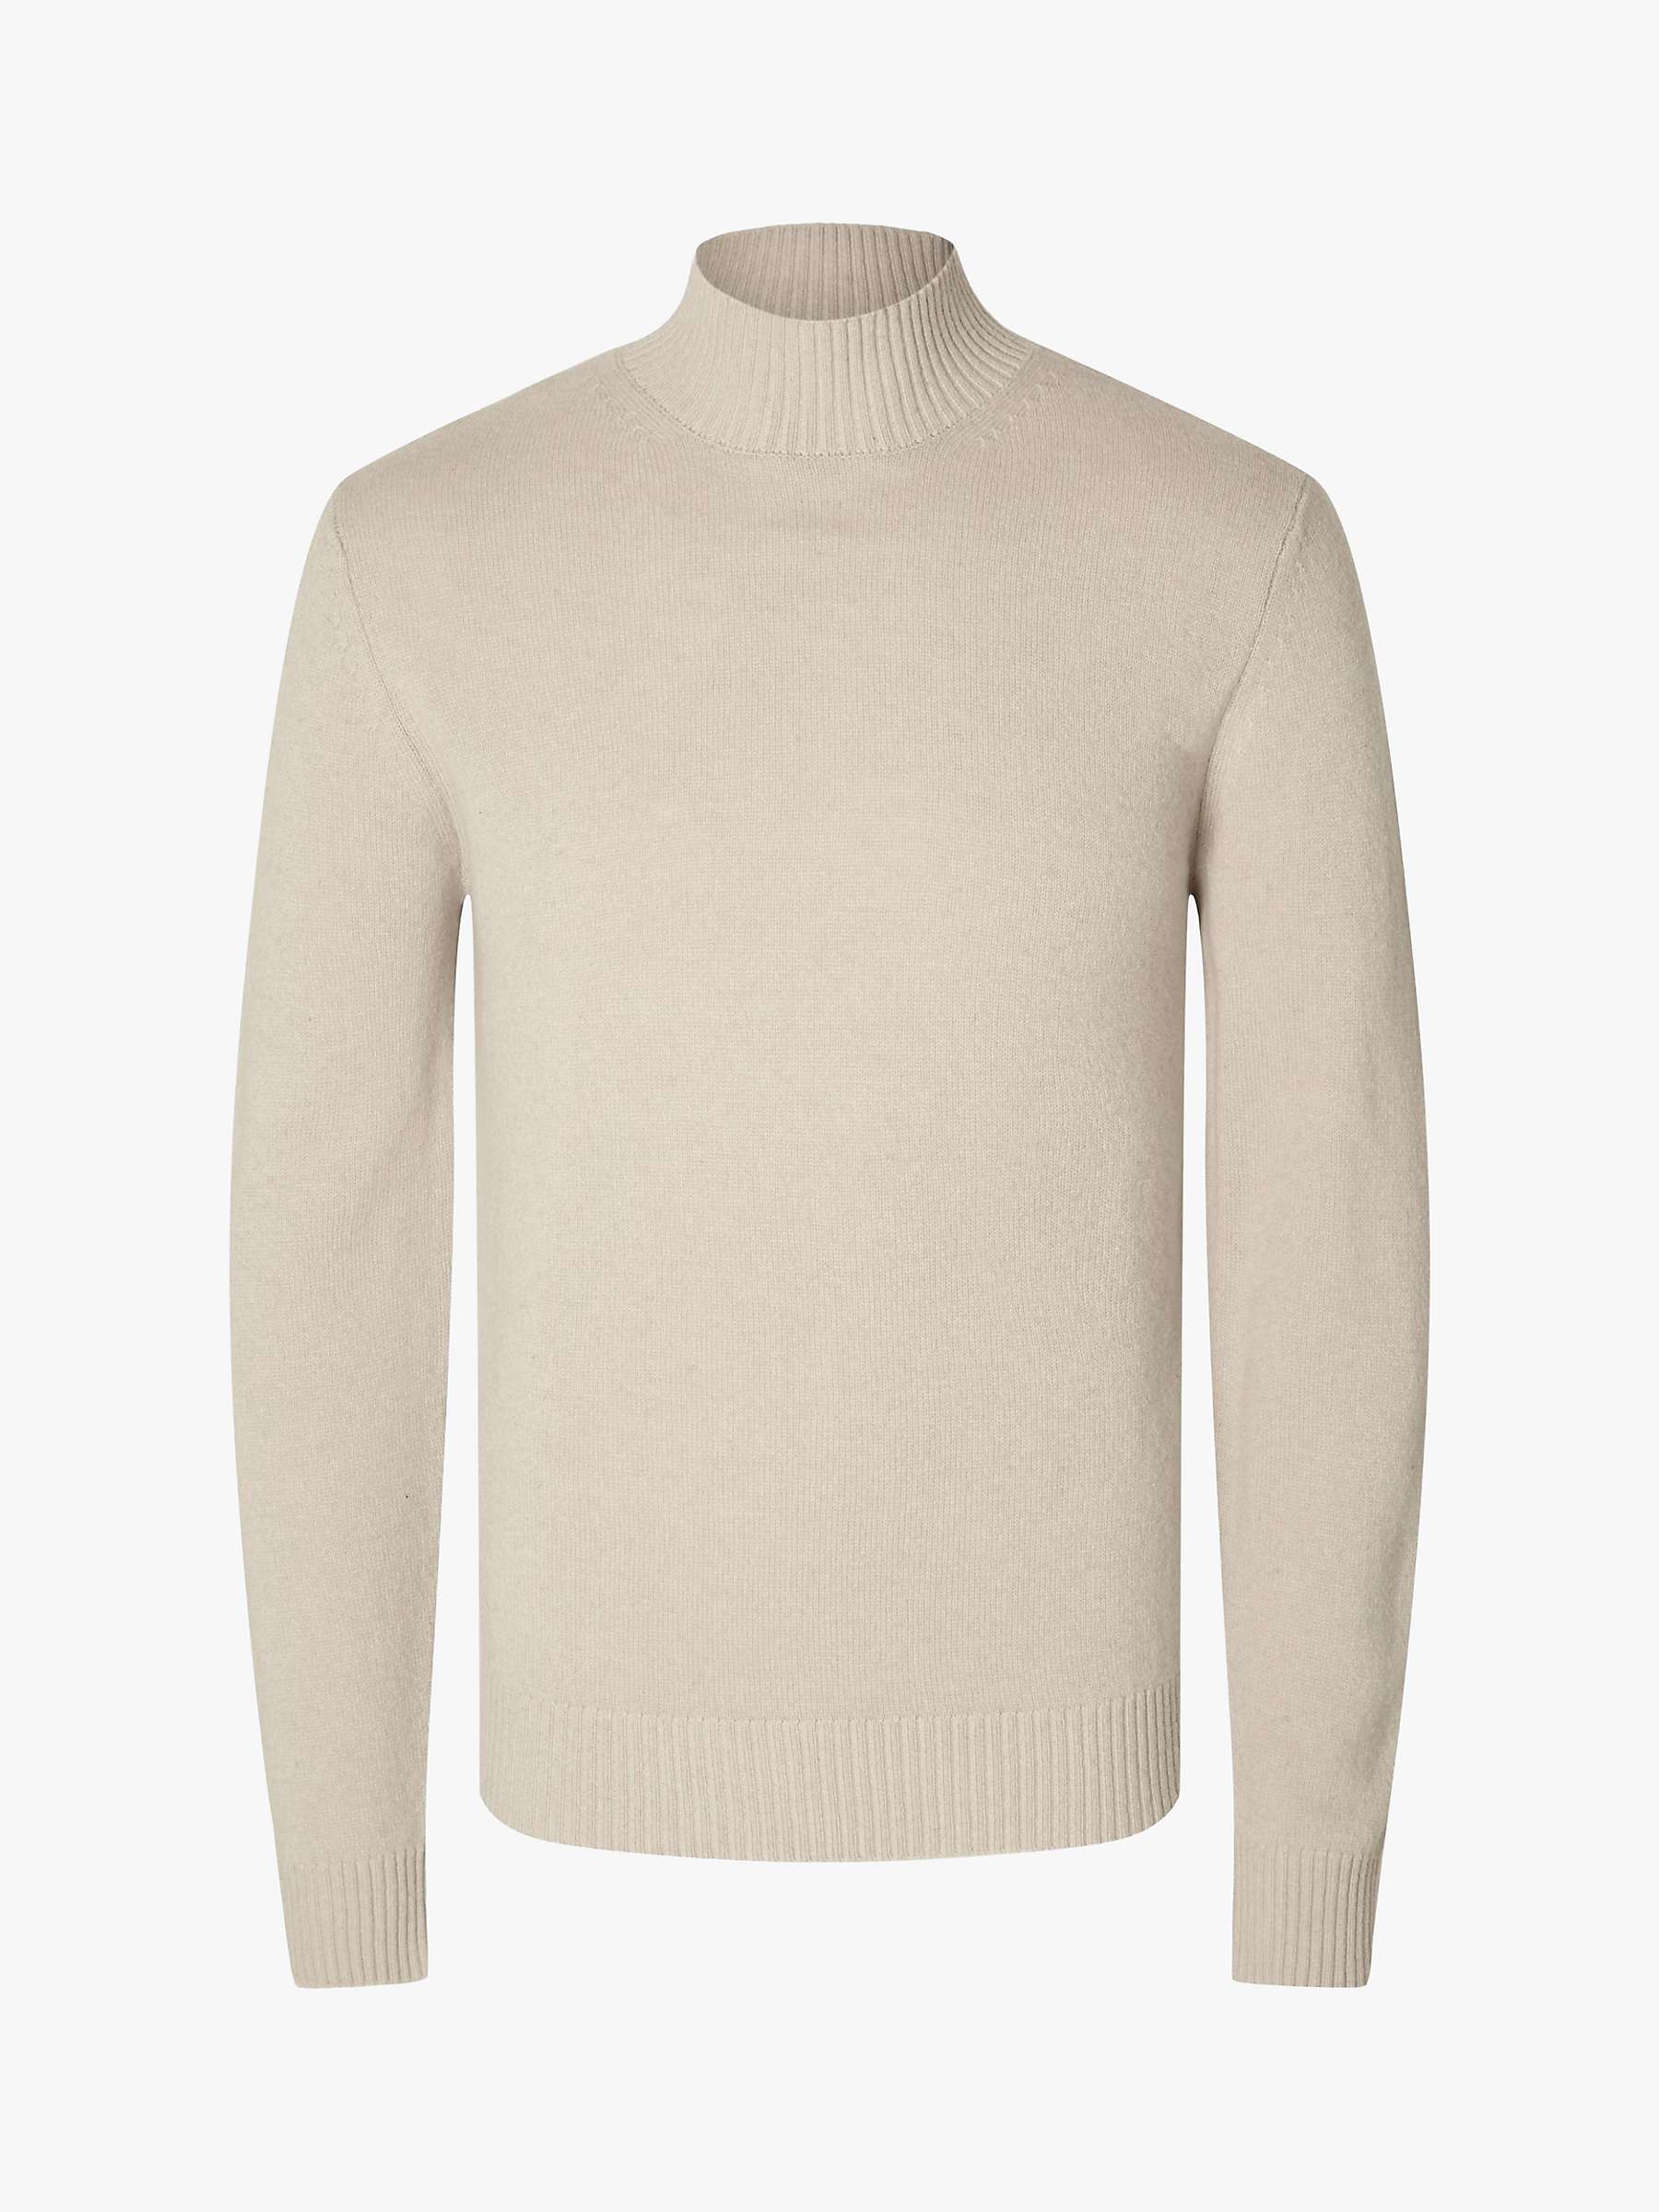 SELECTED HOMME High Neck Essential Pullover Jumper, Oatmeal at John ...